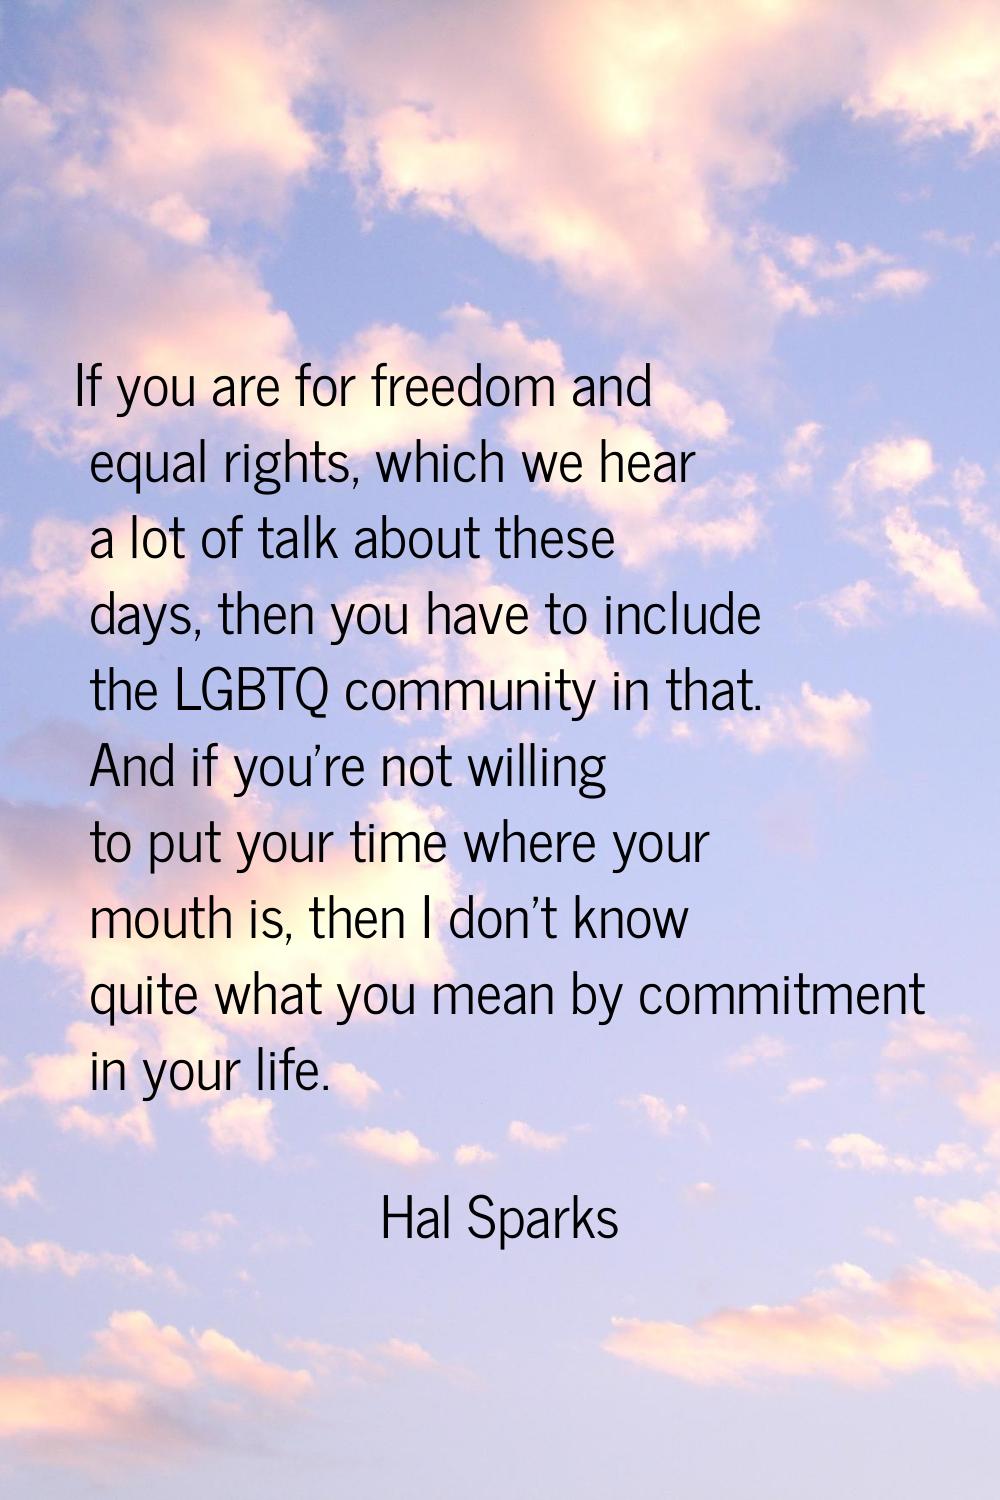 If you are for freedom and equal rights, which we hear a lot of talk about these days, then you hav